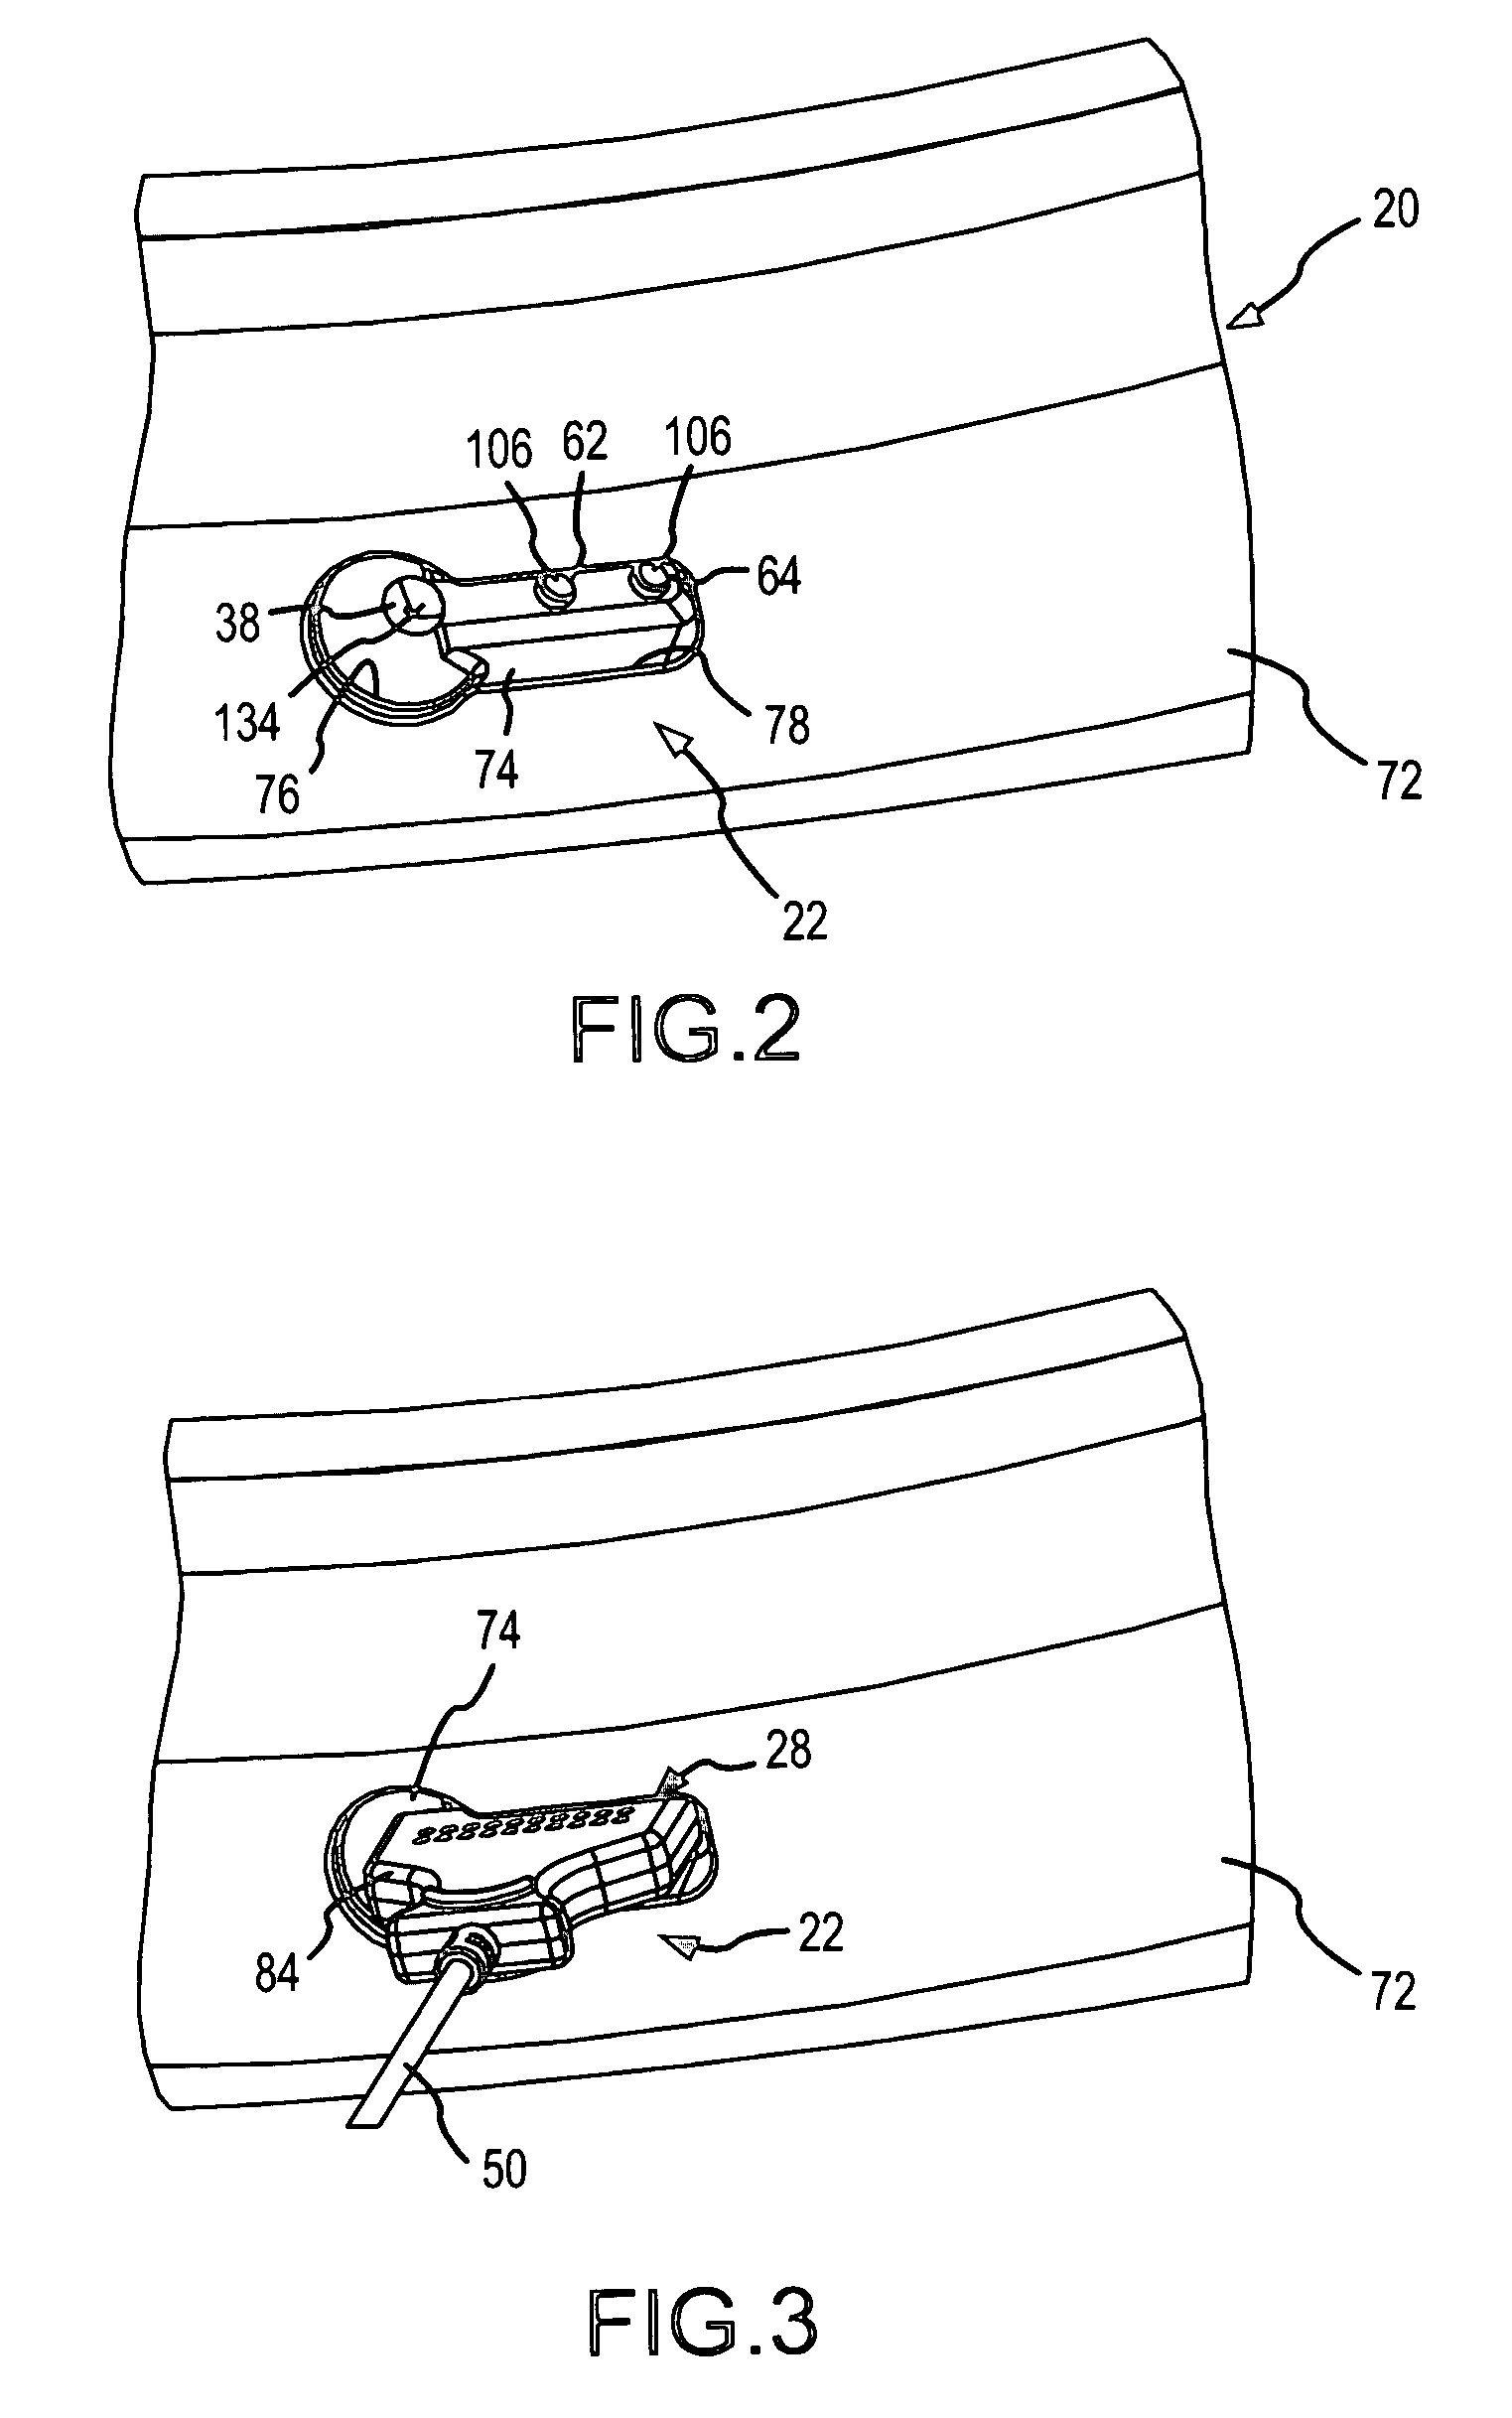 Integrated three-port receptacle and method for connecting hand and foot switched electrosurgical accessories